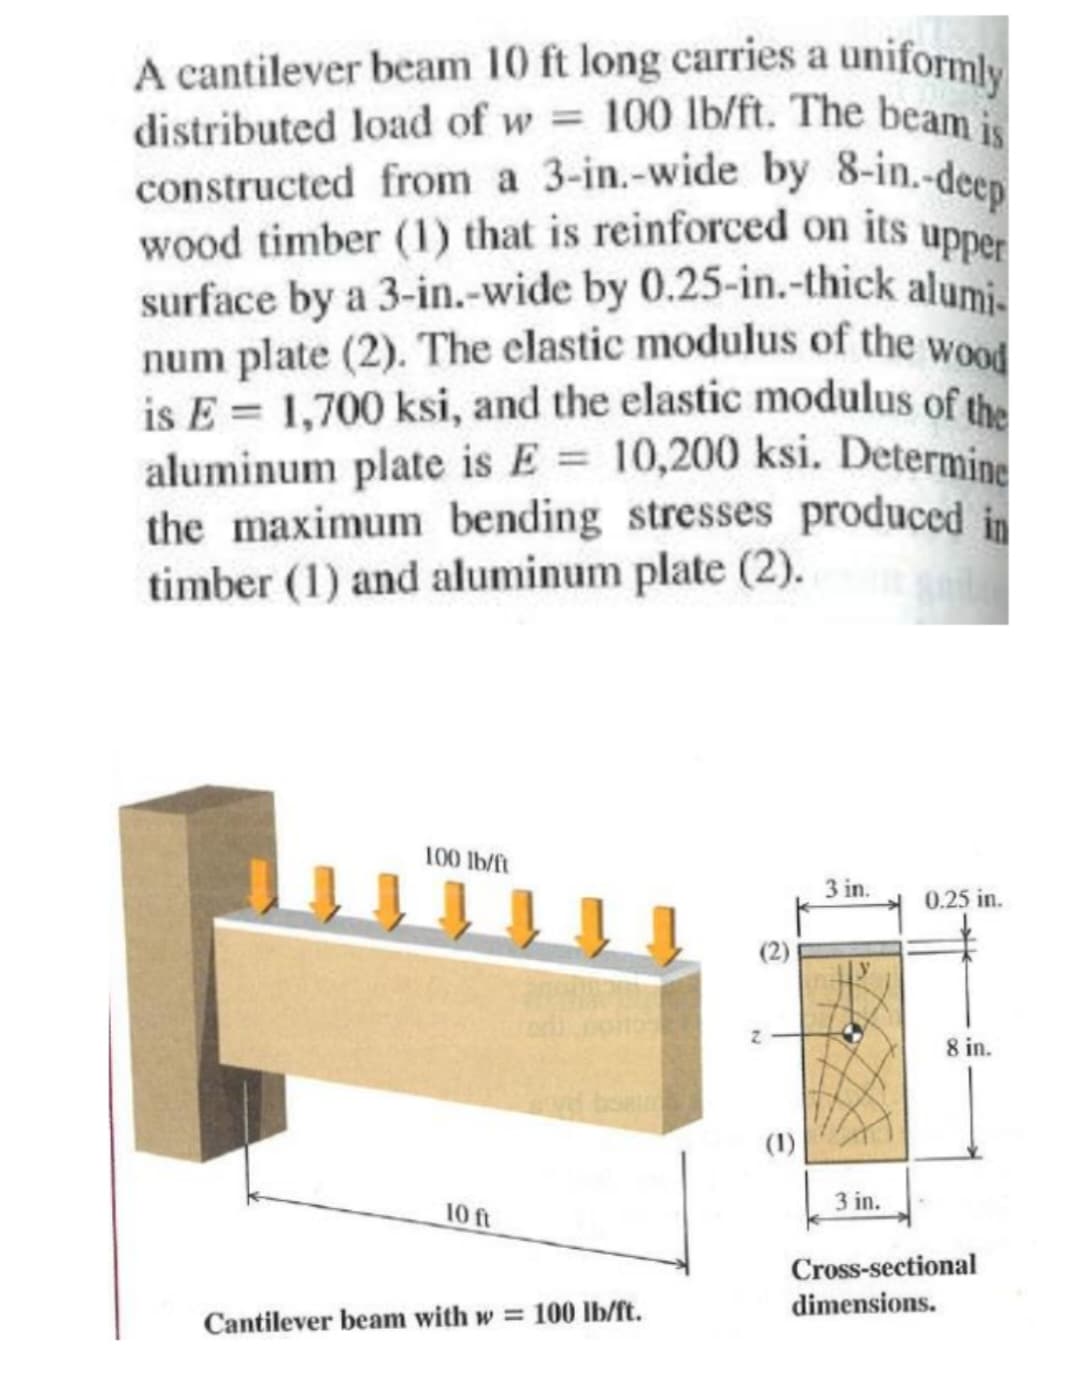 A cantilever beam 10 ft long carries a uniformly
distributed load of w= 100 lb/ft. The beam is
constructed from a 3-in.-wide by 8-in.-deep
wood timber (1) that is reinforced on its upper
surface by a 3-in.-wide by 0.25-in.-thick alumi-
num plate (2). The elastic modulus of the wood
is E= 1,700 ksi, and the elastic modulus of the
aluminum plate is E = 10,200 ksi. Determine
the maximum bending stresses produced in
timber (1) and aluminum plate (2).
100 lb/ft
10 ft
vid bsam
Cantilever beam with w = 100 lb/ft.
(1)
3 in.
3 in.
0.25 in.
8 in.
Cross-sectional
dimensions.